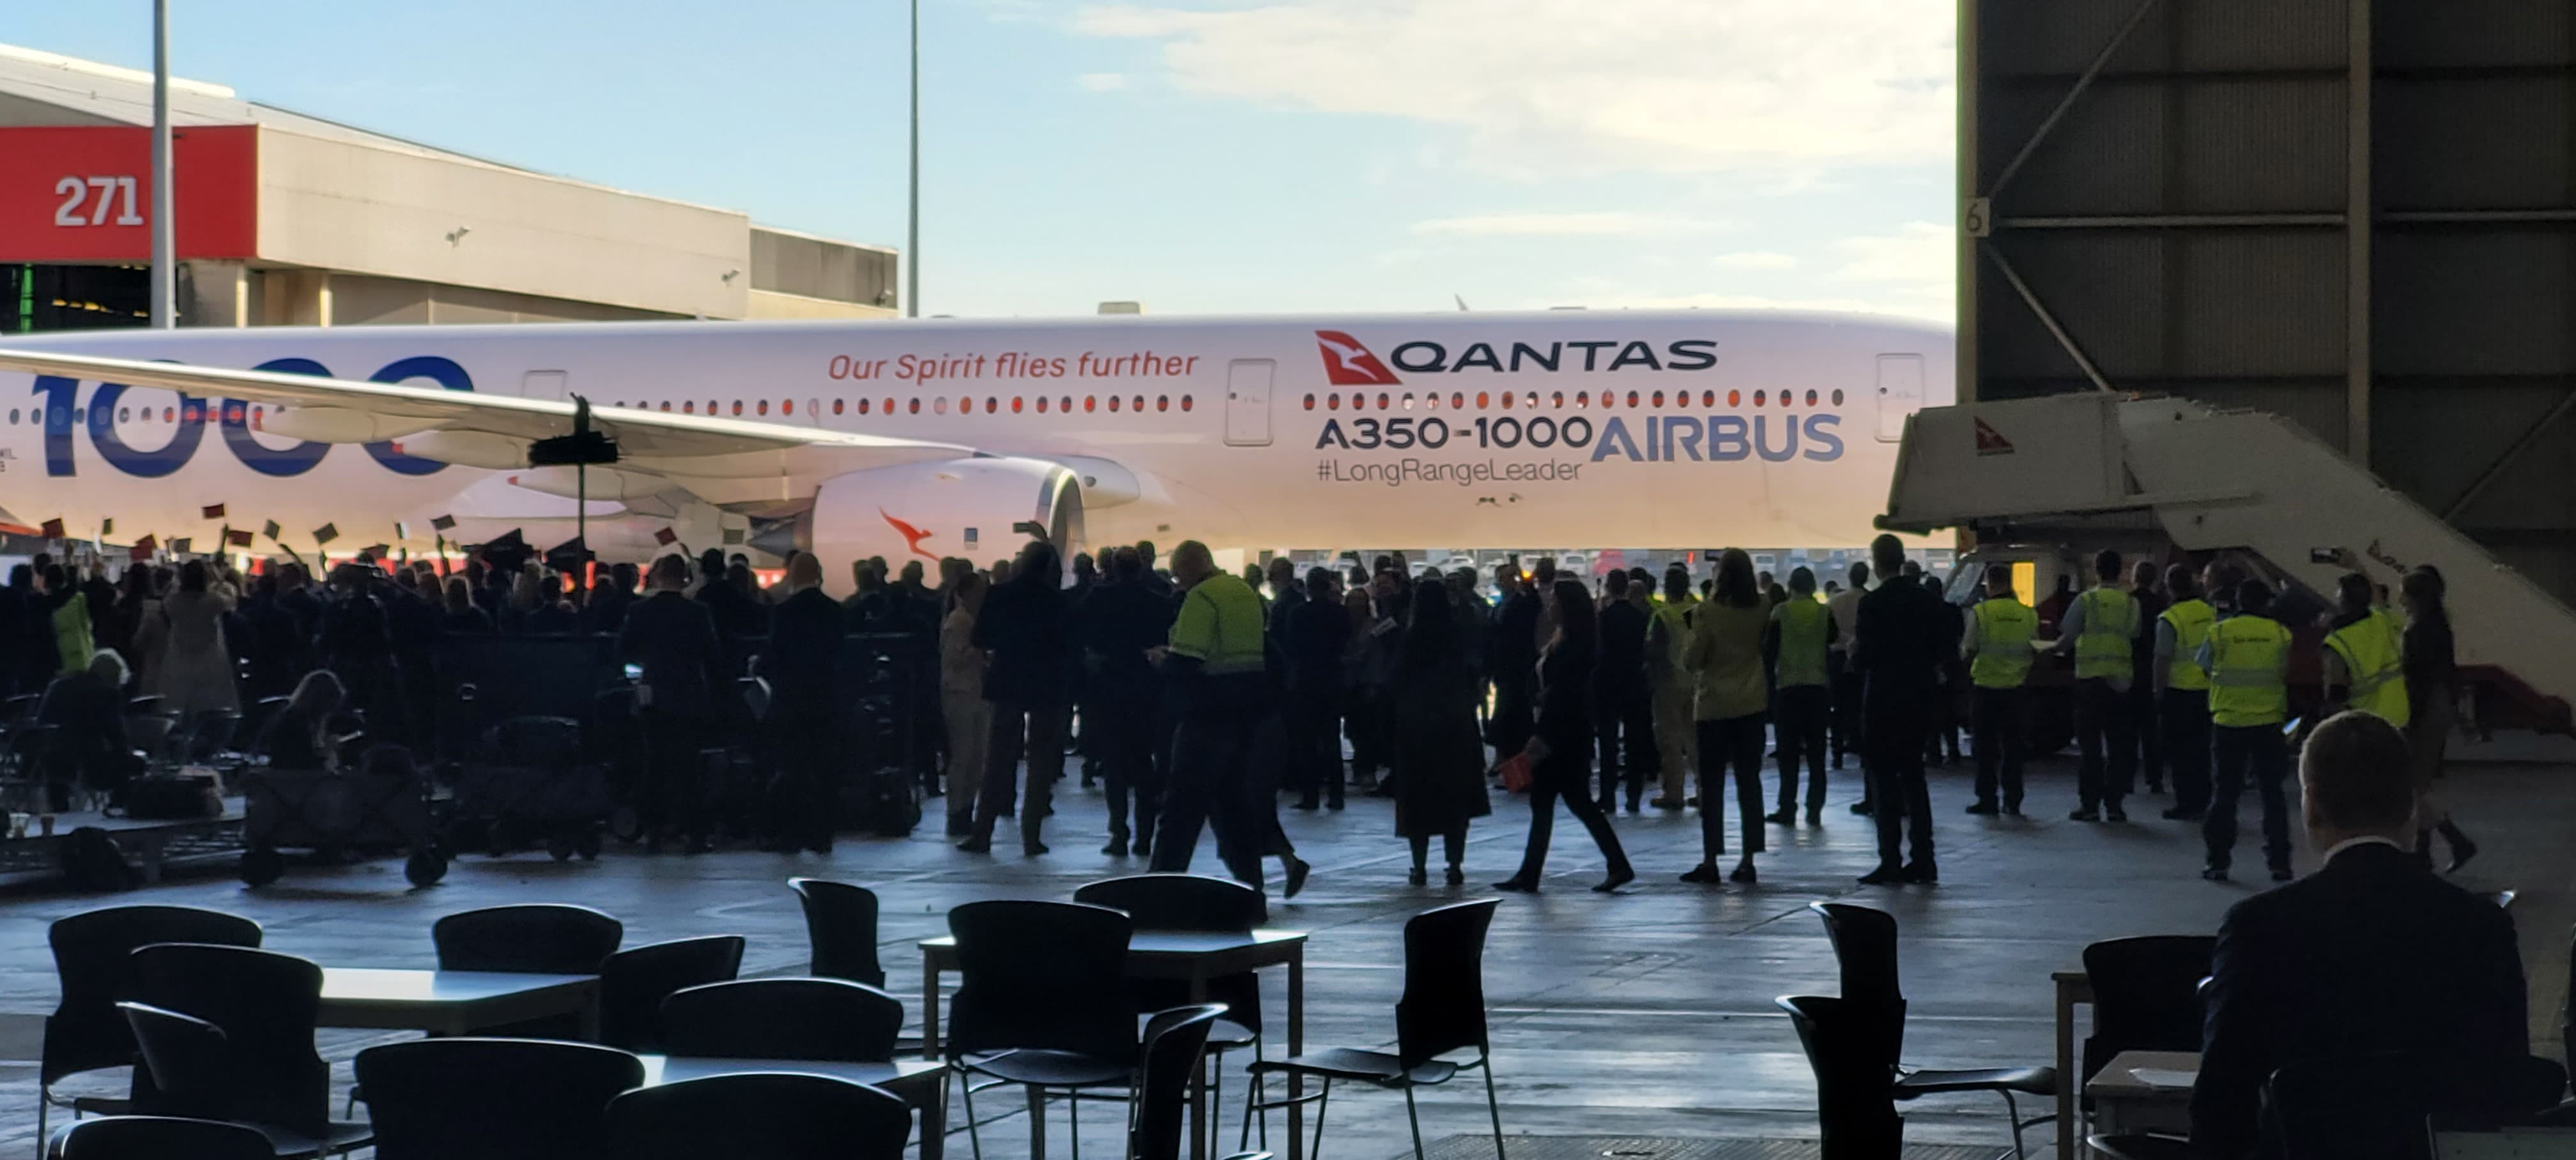 Project Sunrise: Top Shelf's Collaboration In the Launch of Qantas Airbus A350-1000